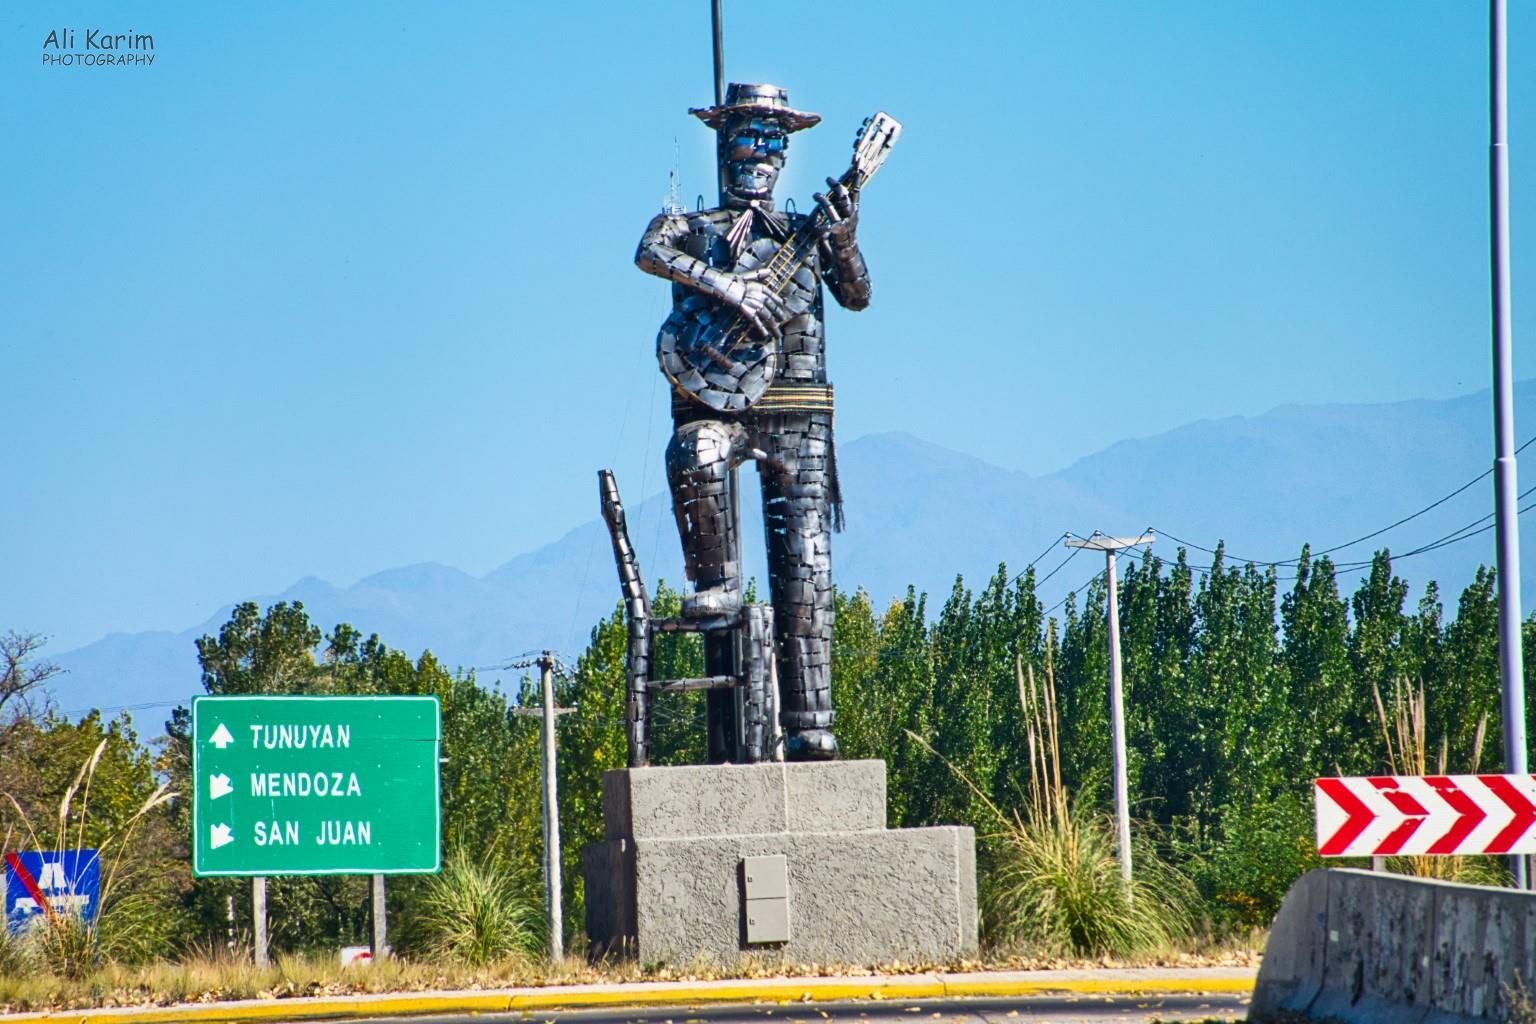 Mendoza, Argentina Interesting statue in a roundabout on the highway